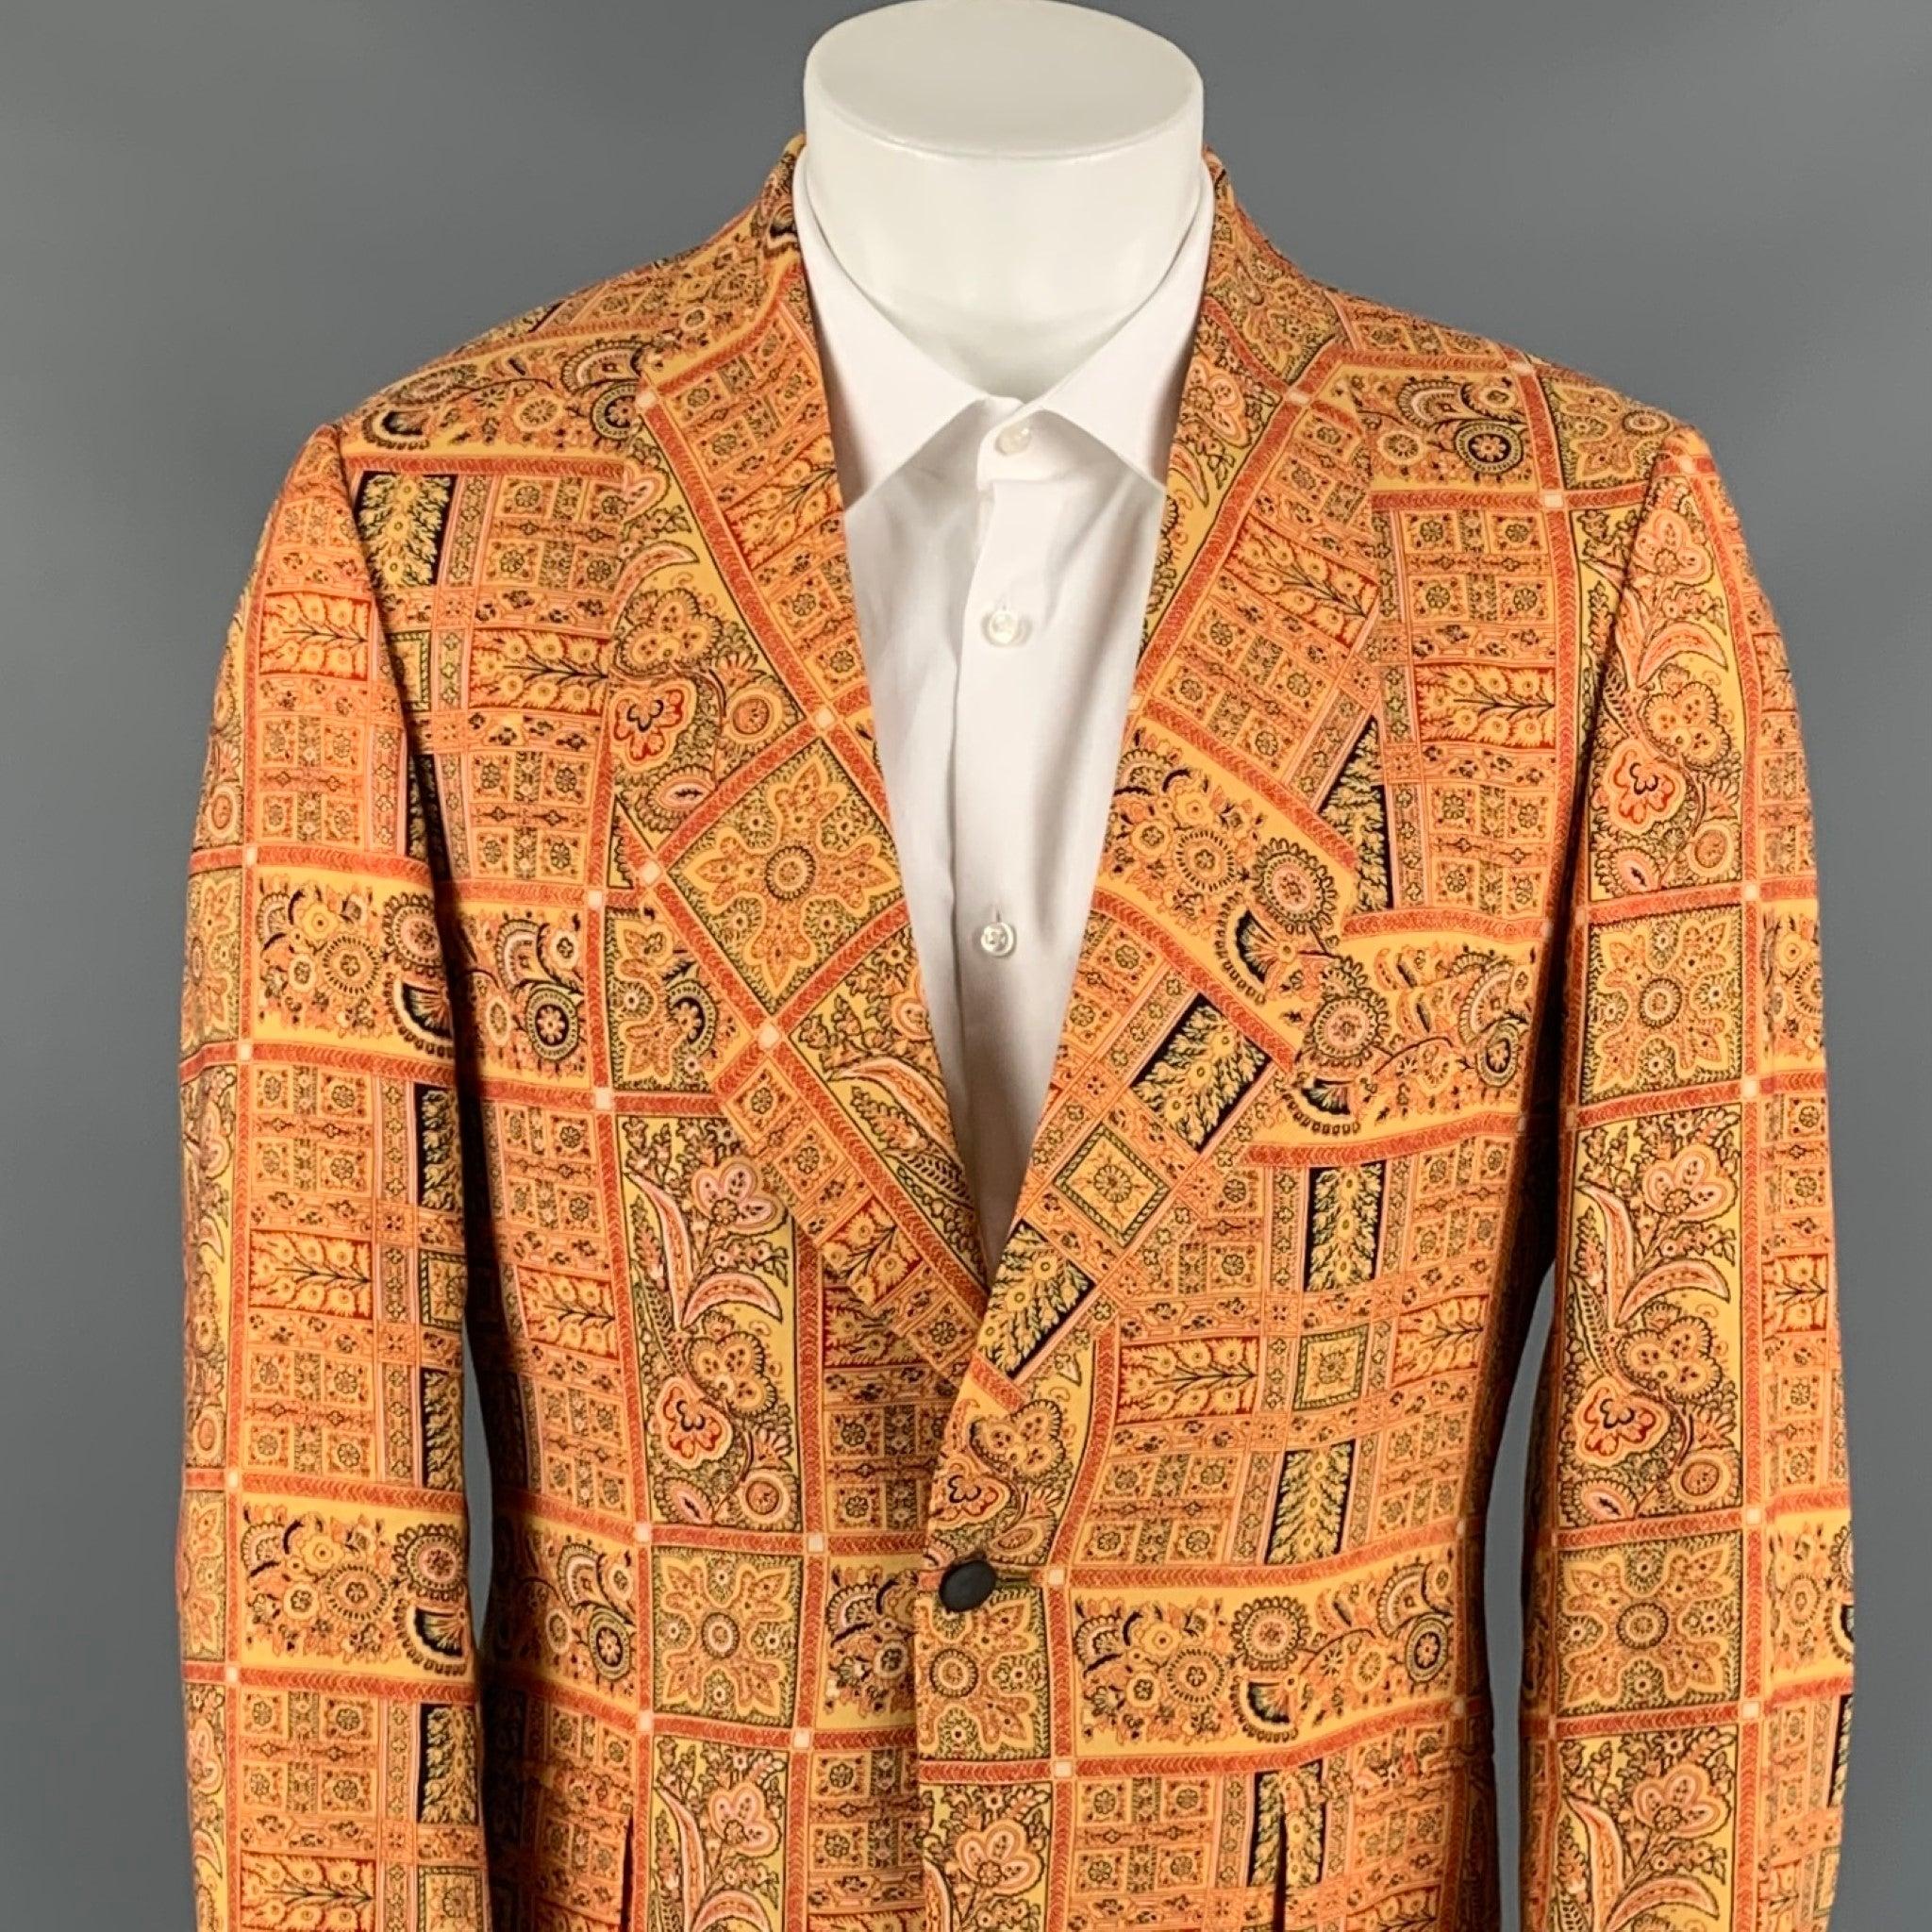 SAKS FIFTH AVENUE sport coat comes in a gold & red print wool blend with a full liner featuring a shawl collar, single back vent, flap pockets, and a single button closure. Made in USA. Very Good
Pre-Owned Condition.  

Marked:   No size marked. 